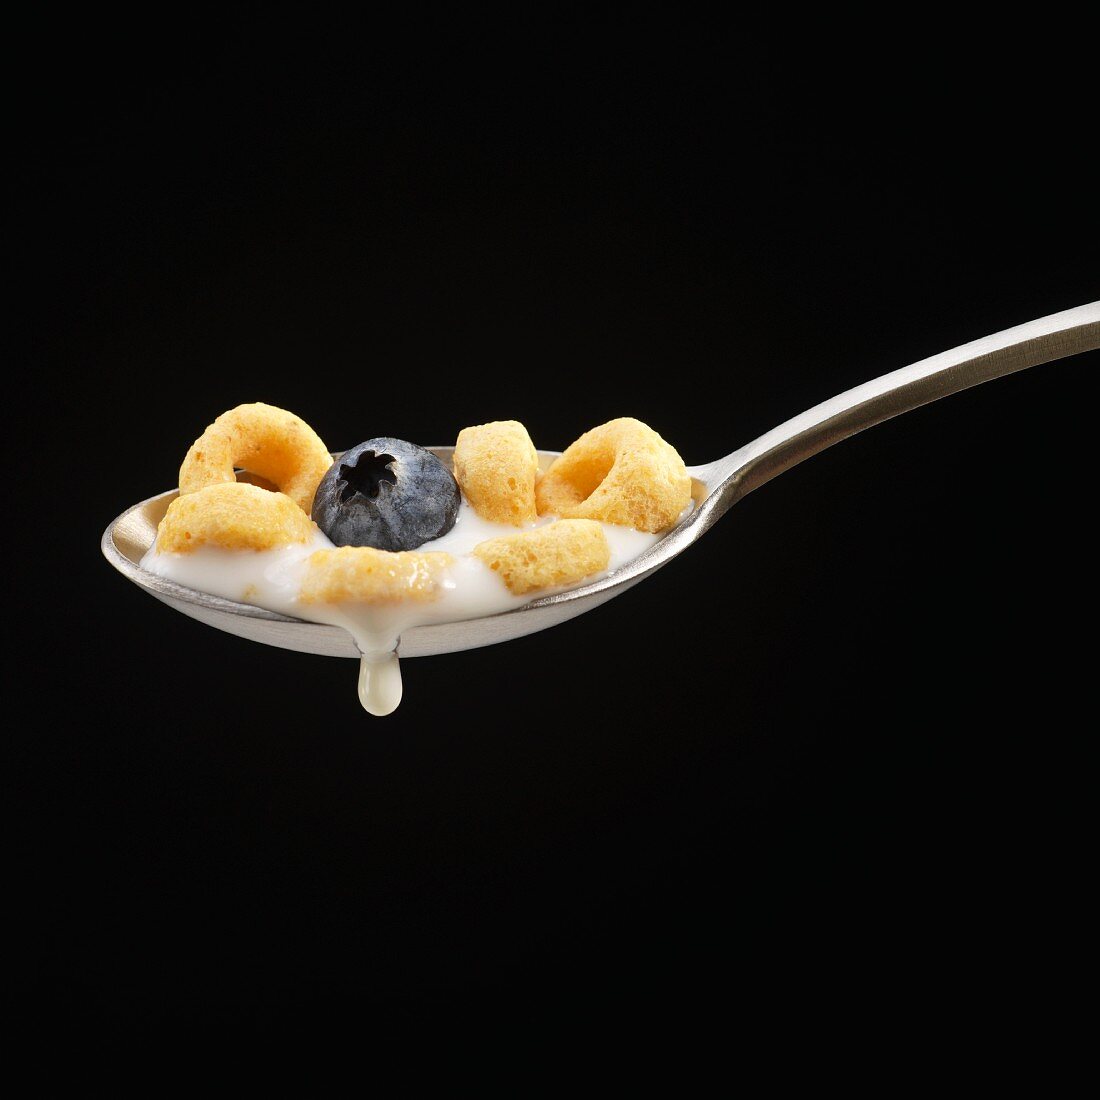 Spoonful of Cereal with Milk and a Blueberry